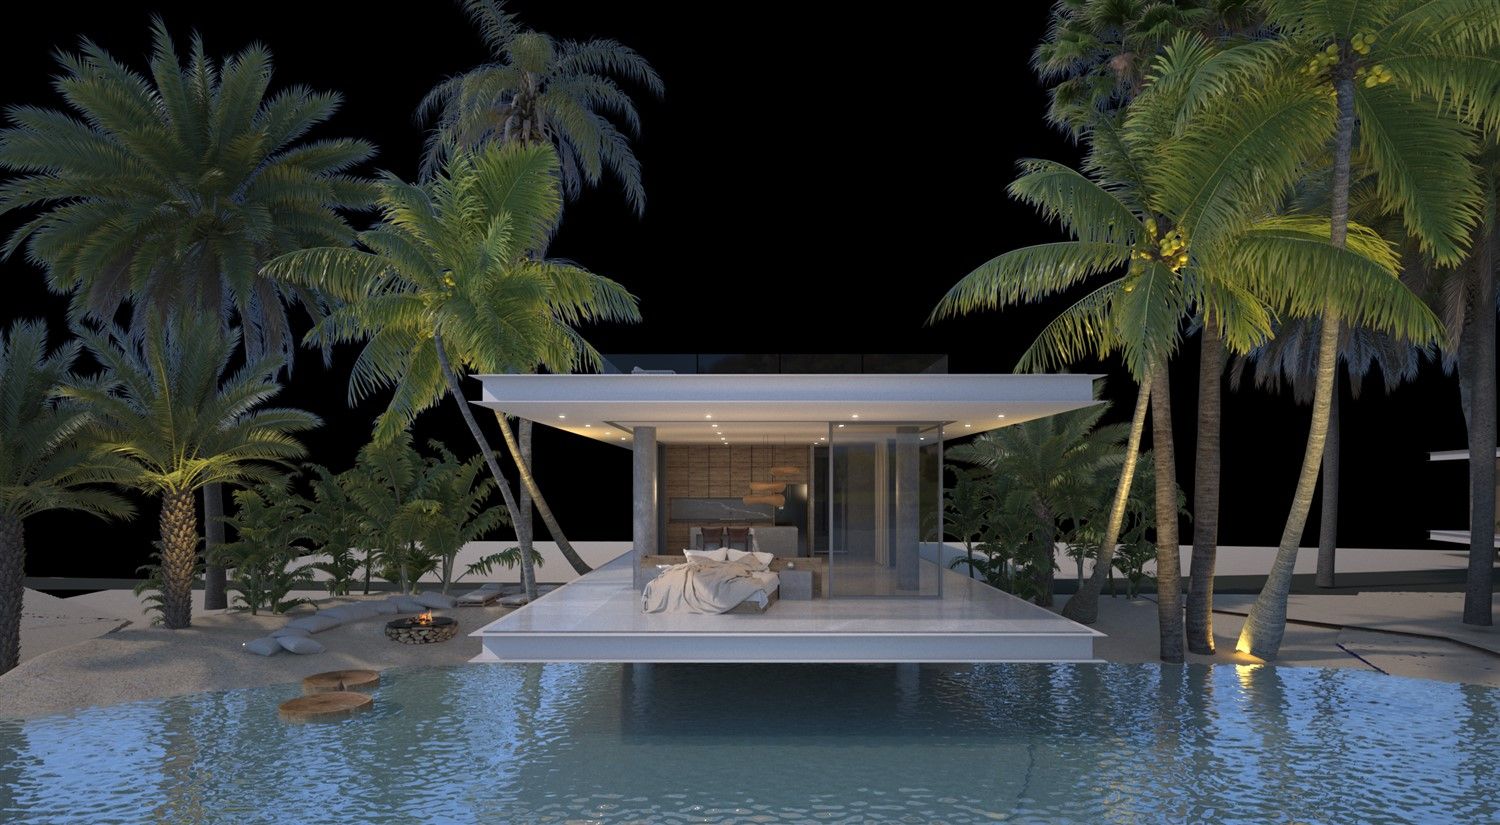 Luxury 3+1 bungalows with their own private artificial beaches